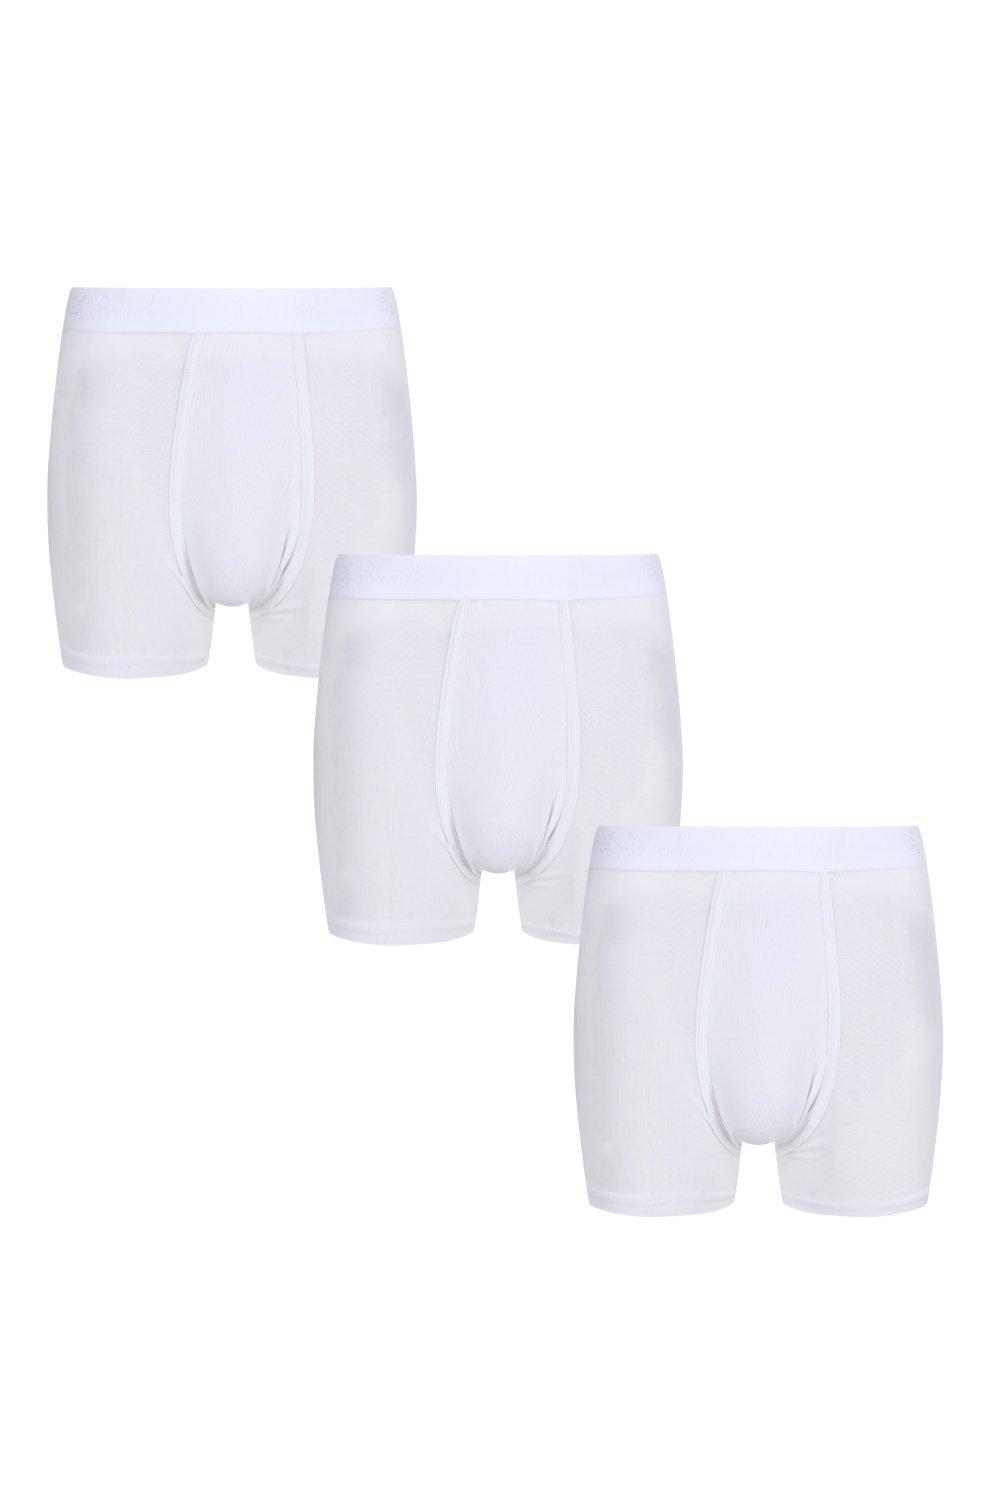 3 Pair Pack Hipster Trunk